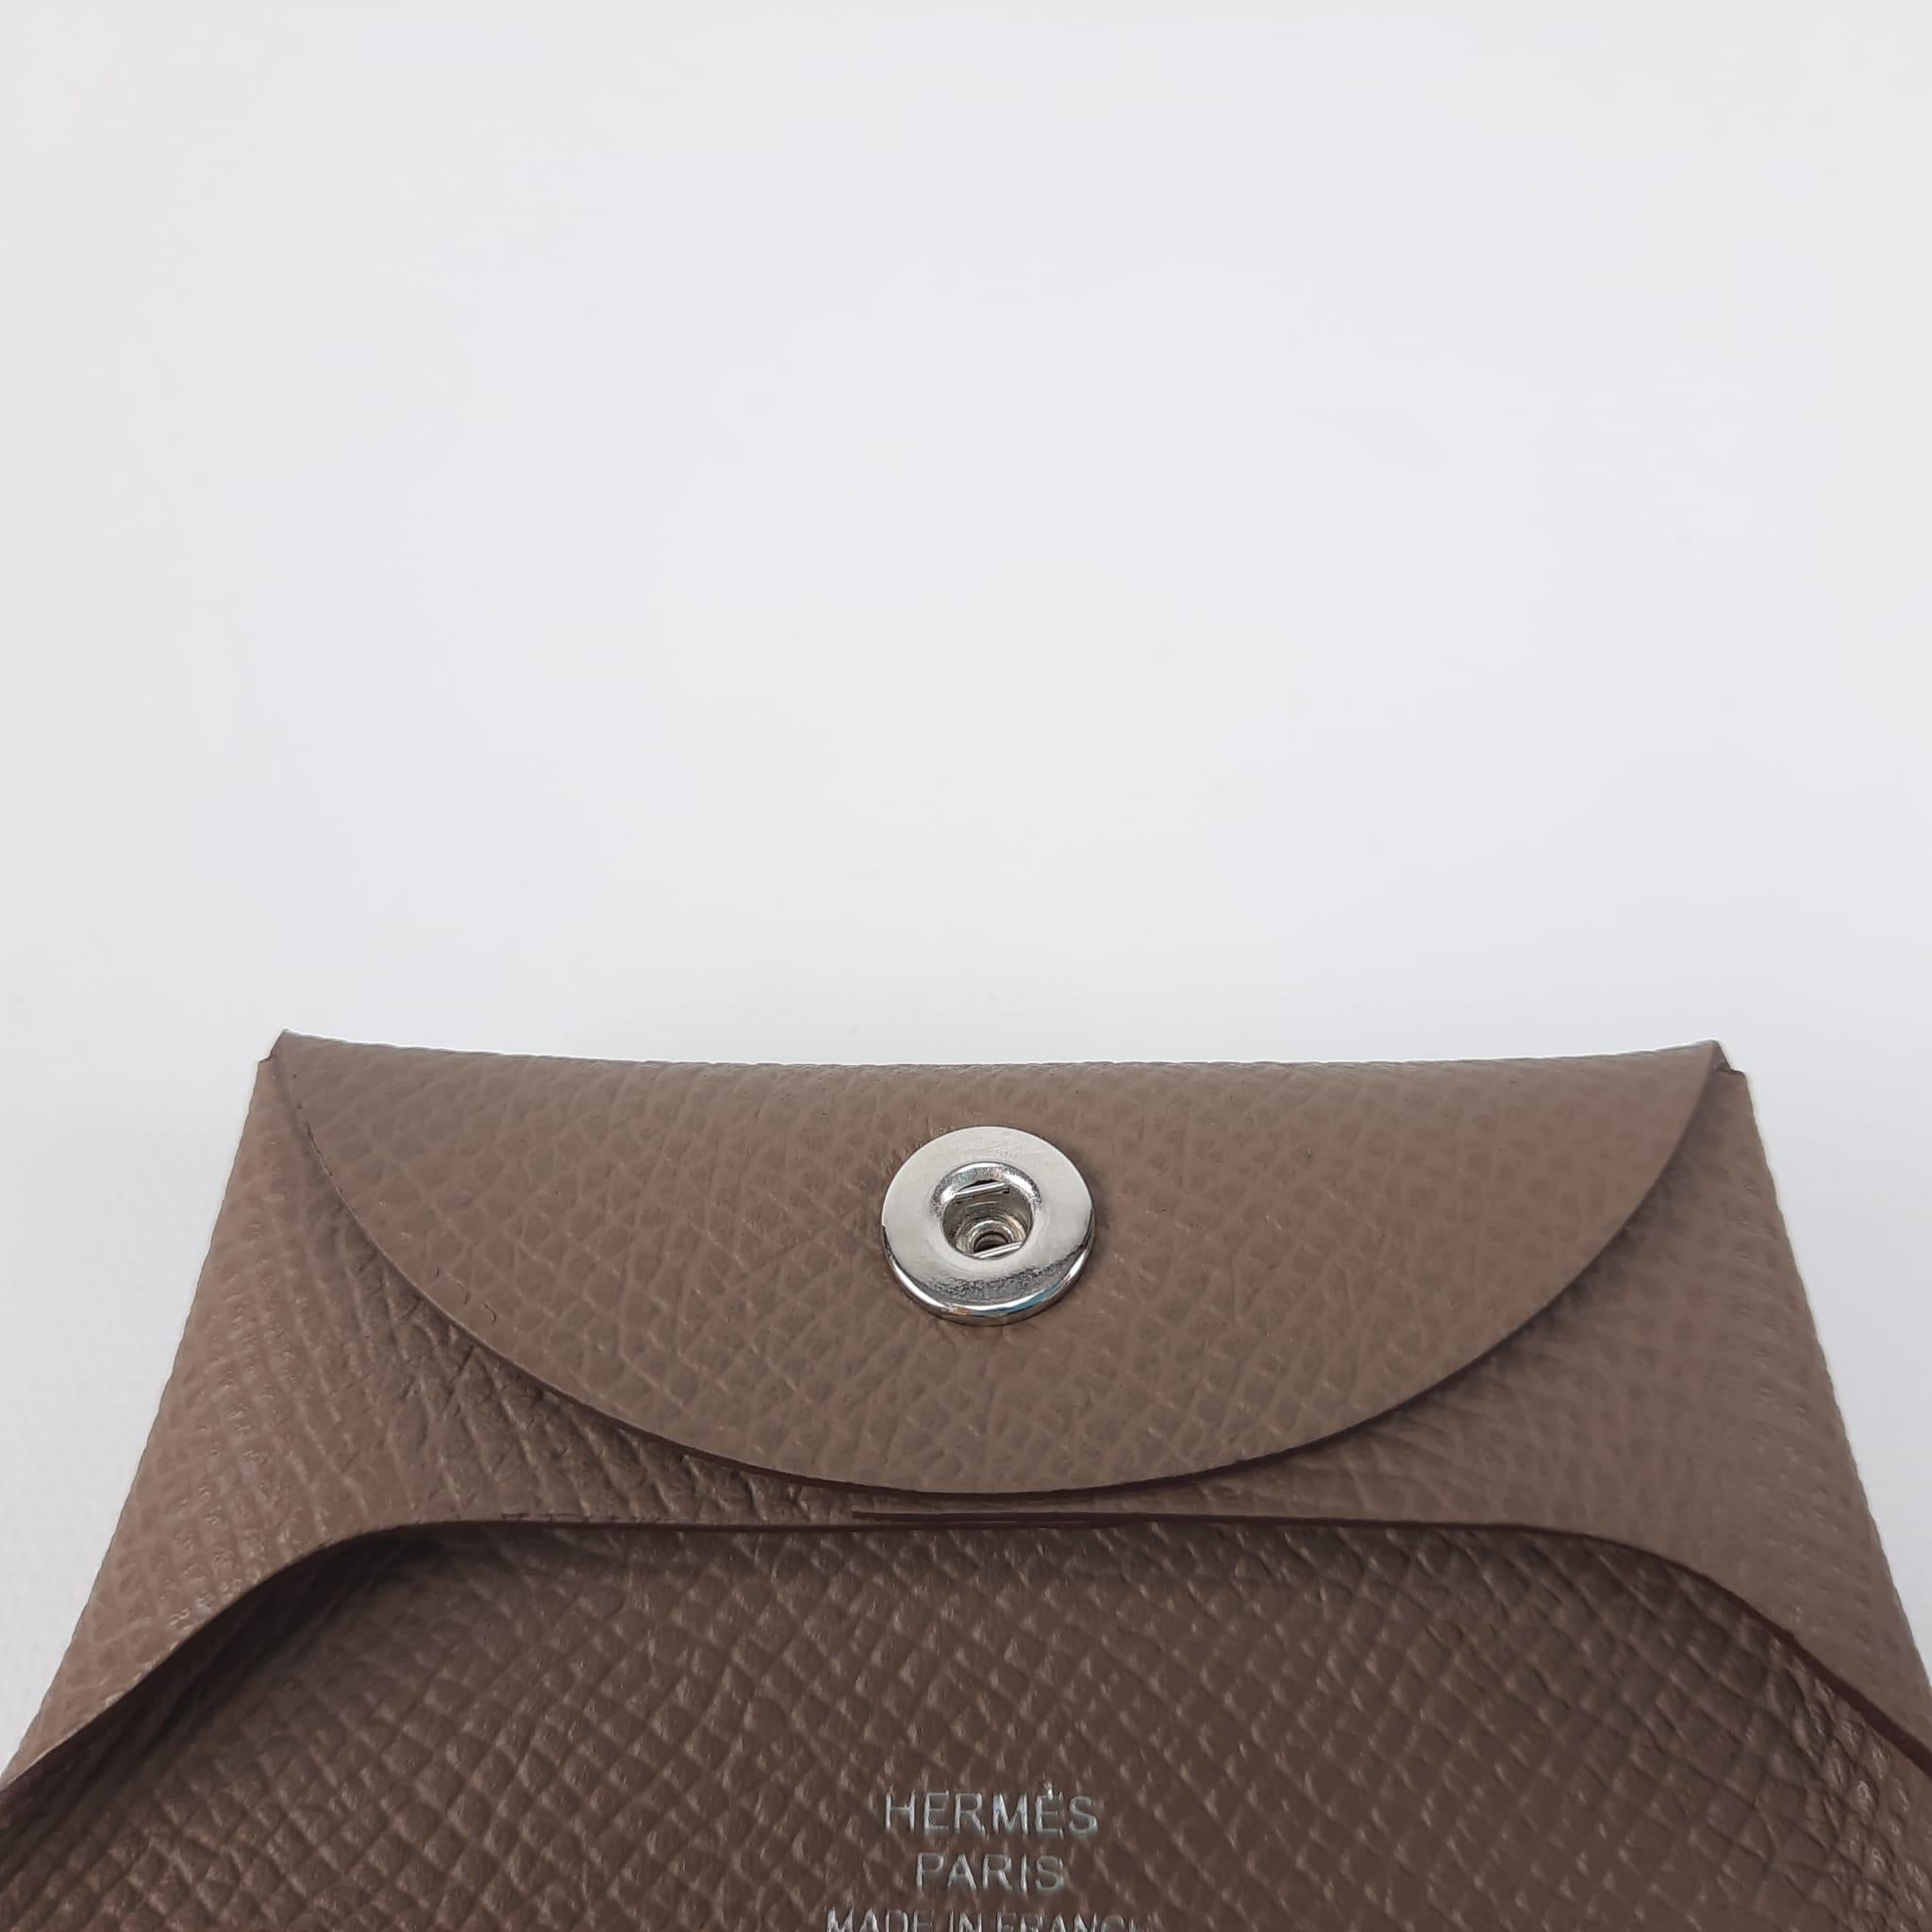 Hermes Bastia change purse Etoupe epsom leather  In New Condition For Sale In Nicosia, CY